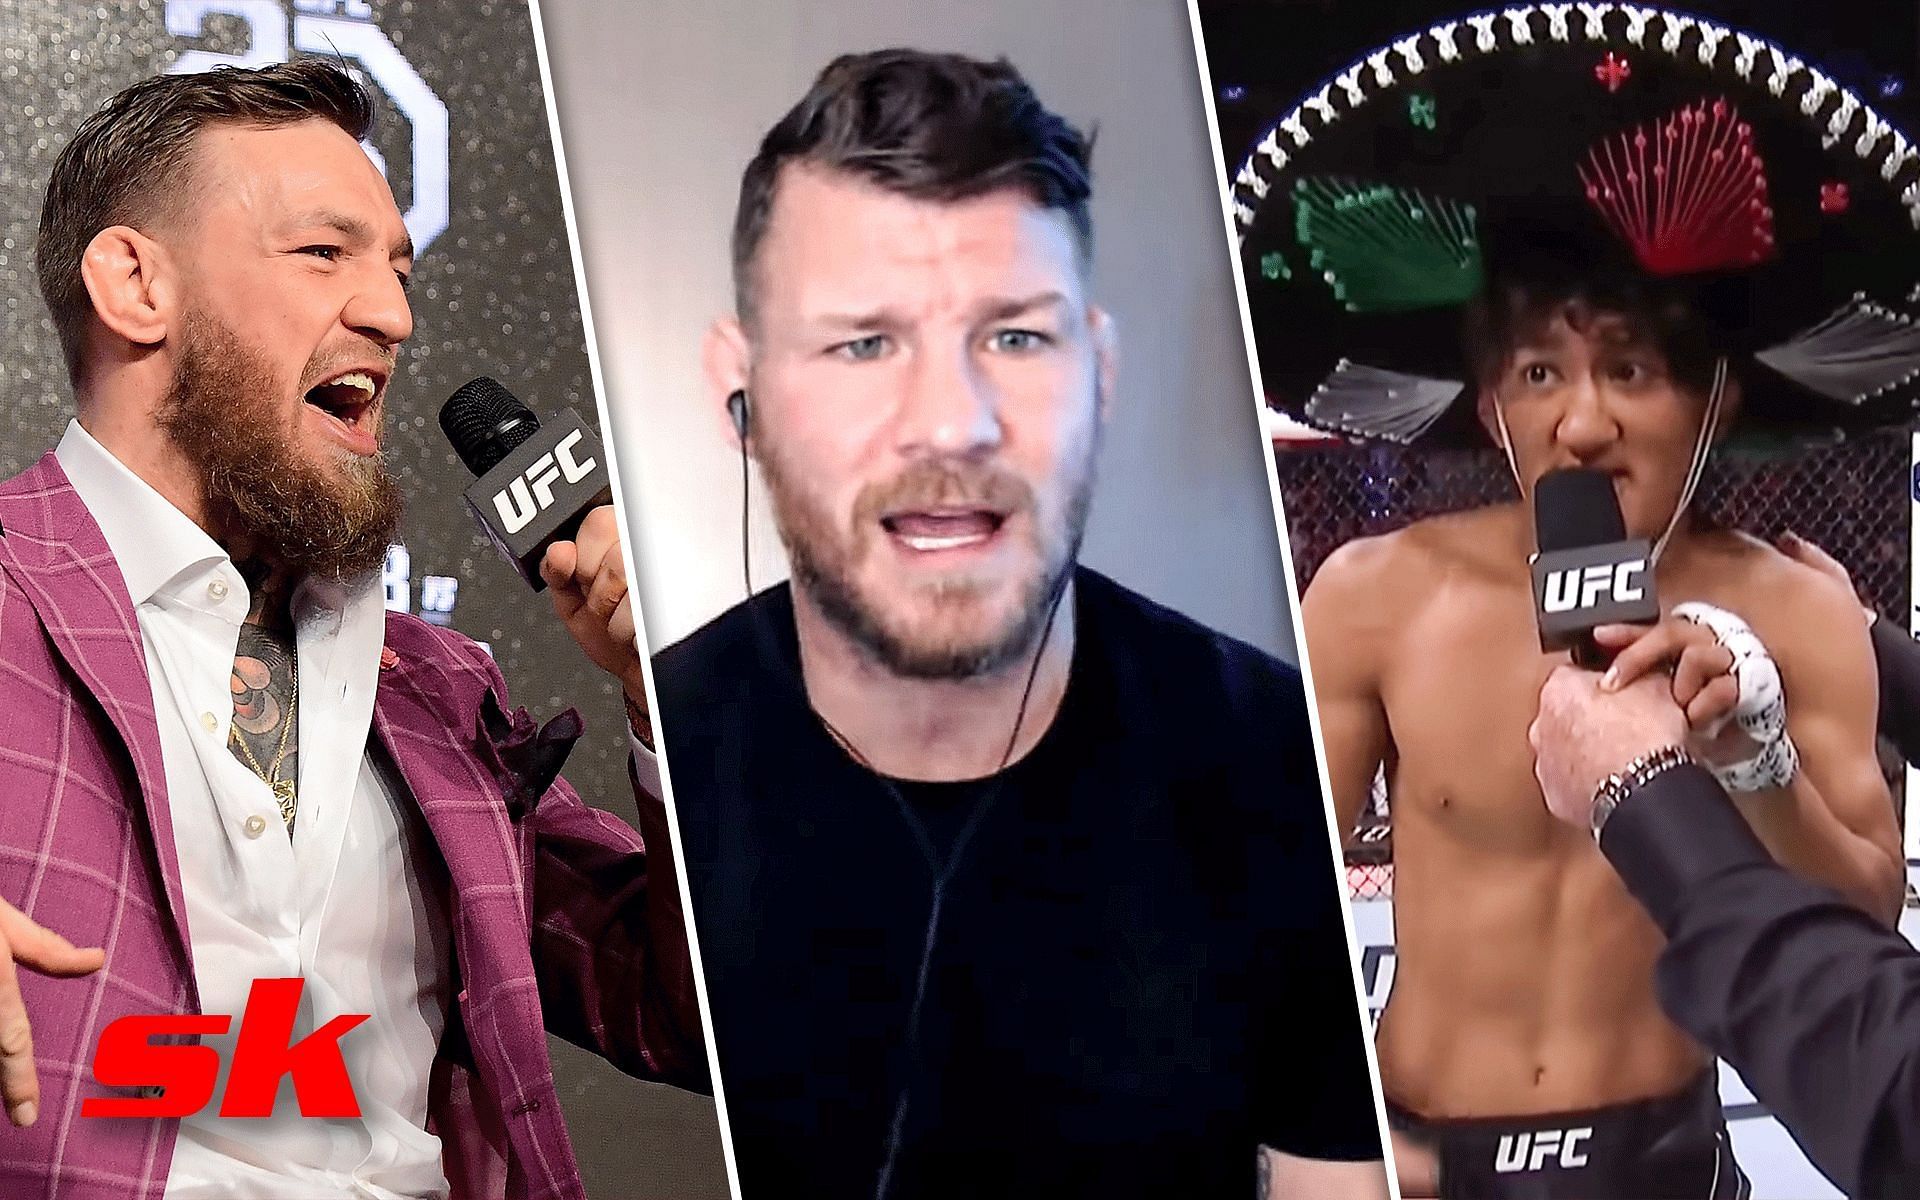 Michael Bisping holds Conor McGregor responsible for Raul Rosas Jr. talking &quot;ridiculously big game&quot; [Images via:  UFC - Ultimate Fighting Championship and Michael Bisping podcast on YouTube]